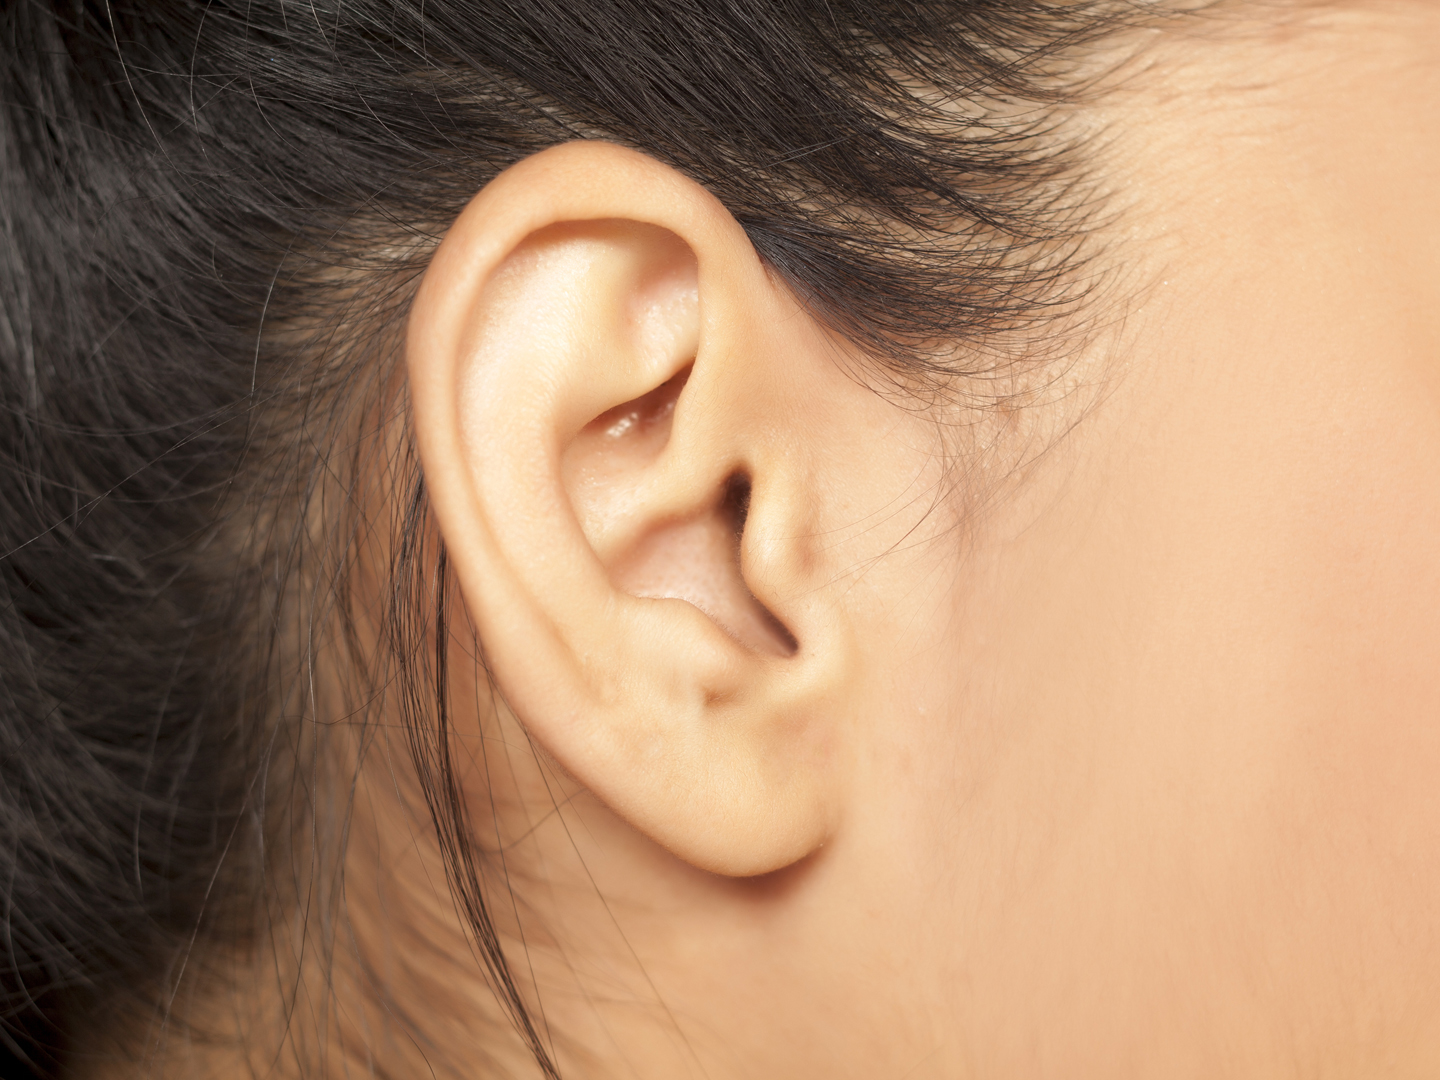 How is ear wax produced in the body?